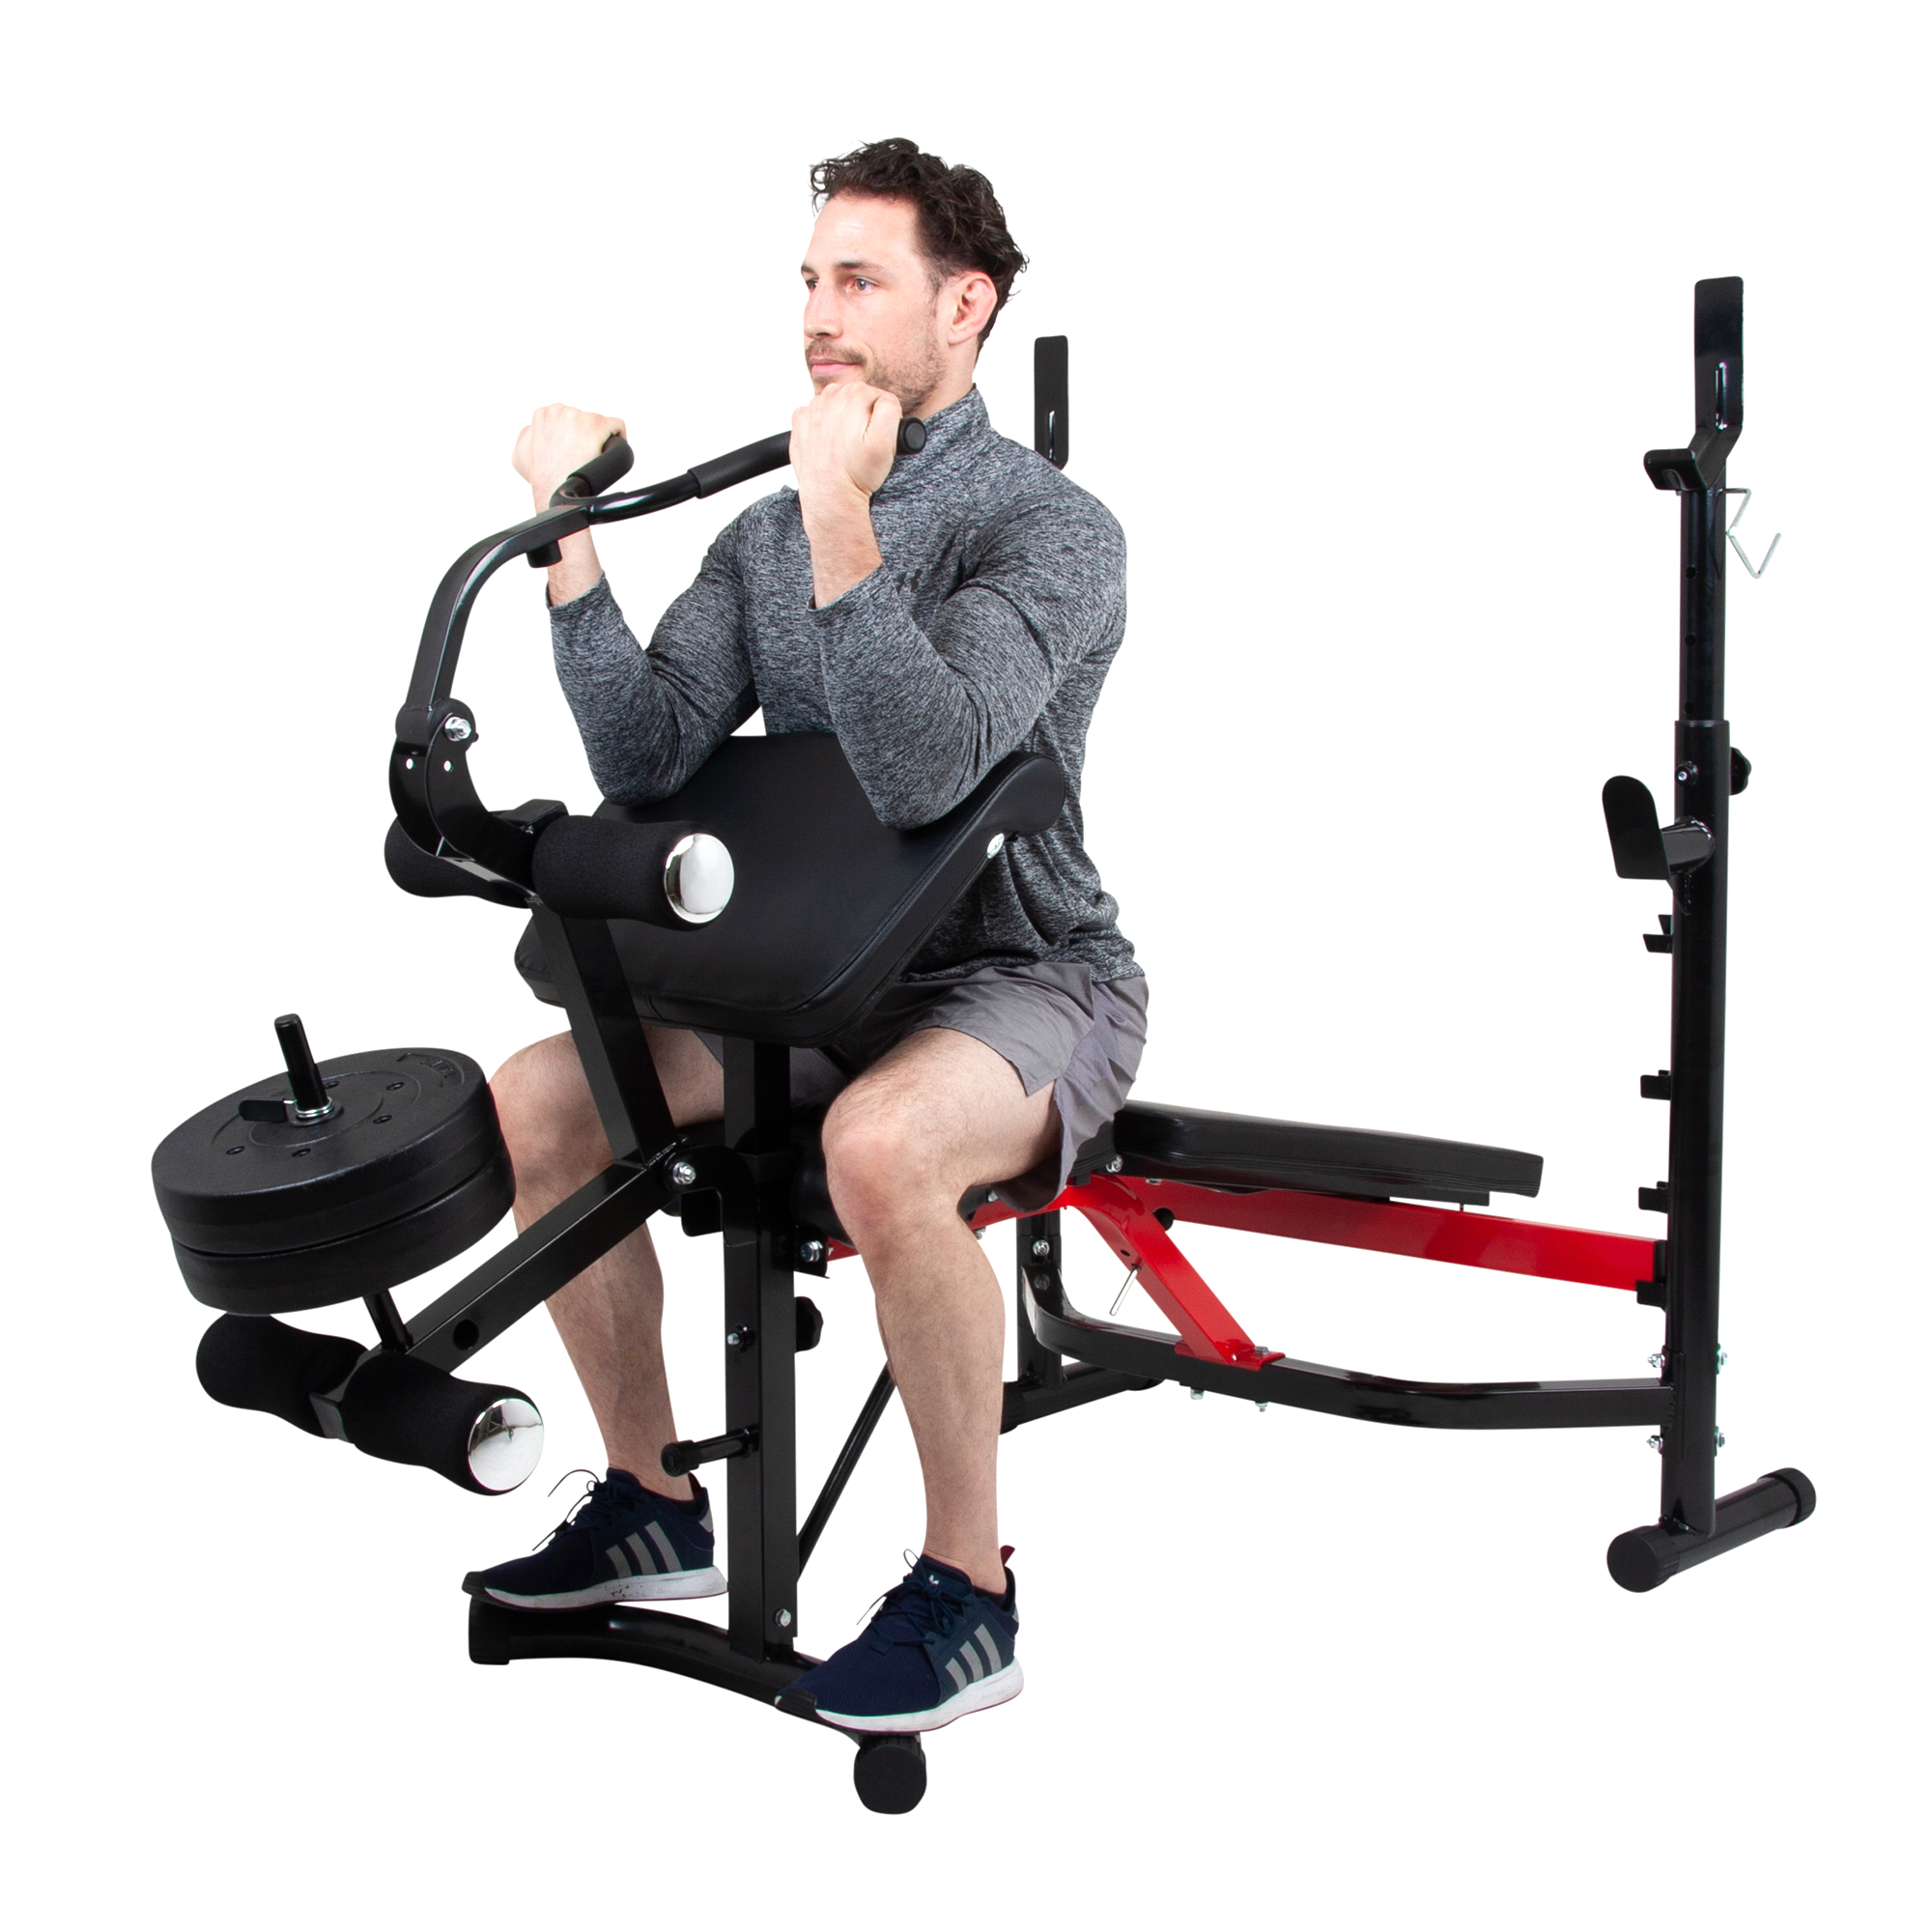 Body Champ BCB5268 Olympic Weight Bench with Arm Curl and Curl Bar Attachment, 300 Lbs. Weight Limit - image 3 of 10